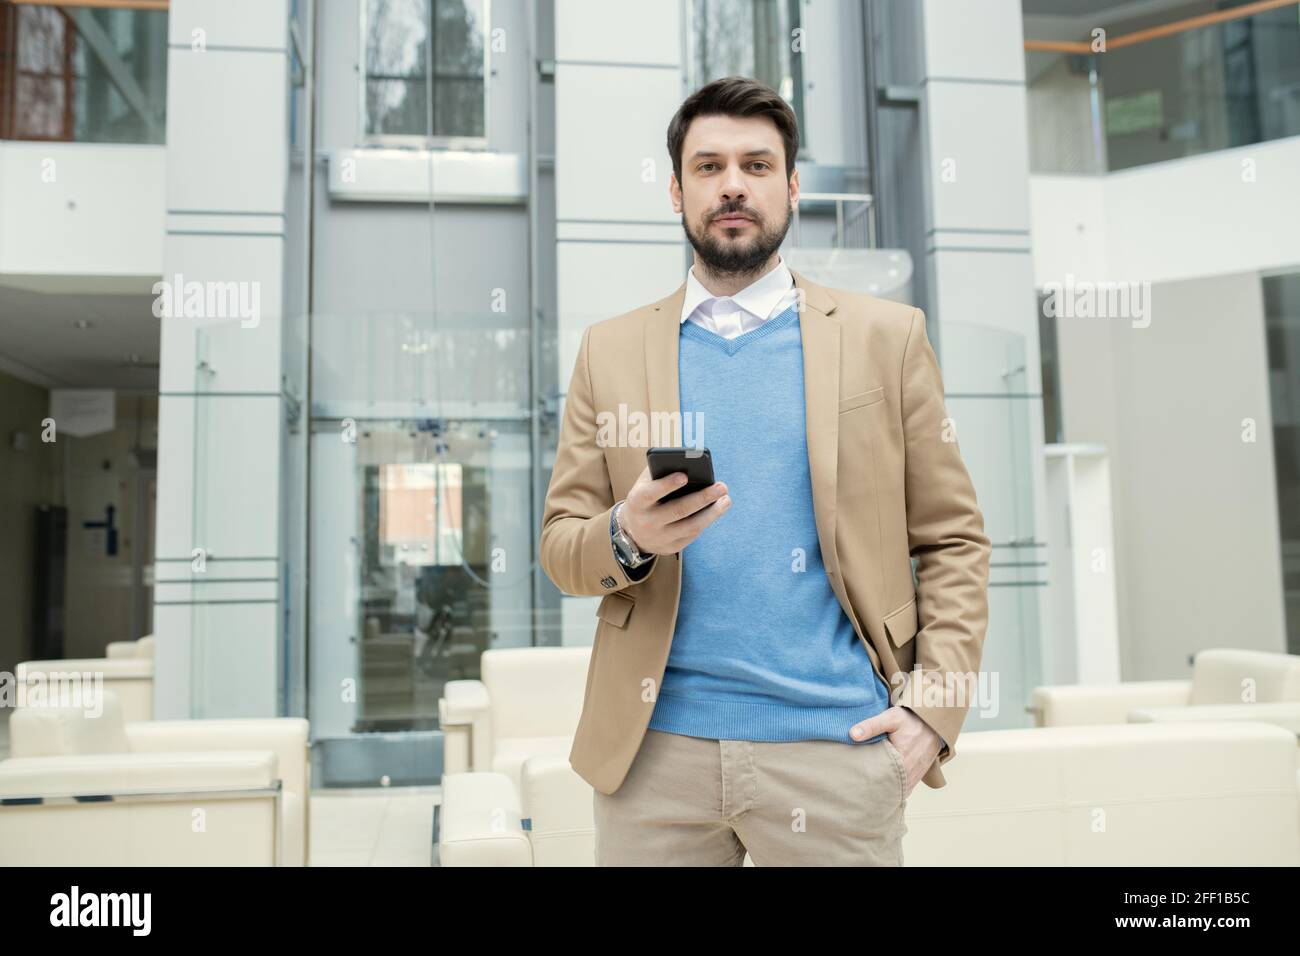 Portrait of content young bearded lawyer in blue sweater holding hand in pocket and checking smartphone in lobby Stock Photo